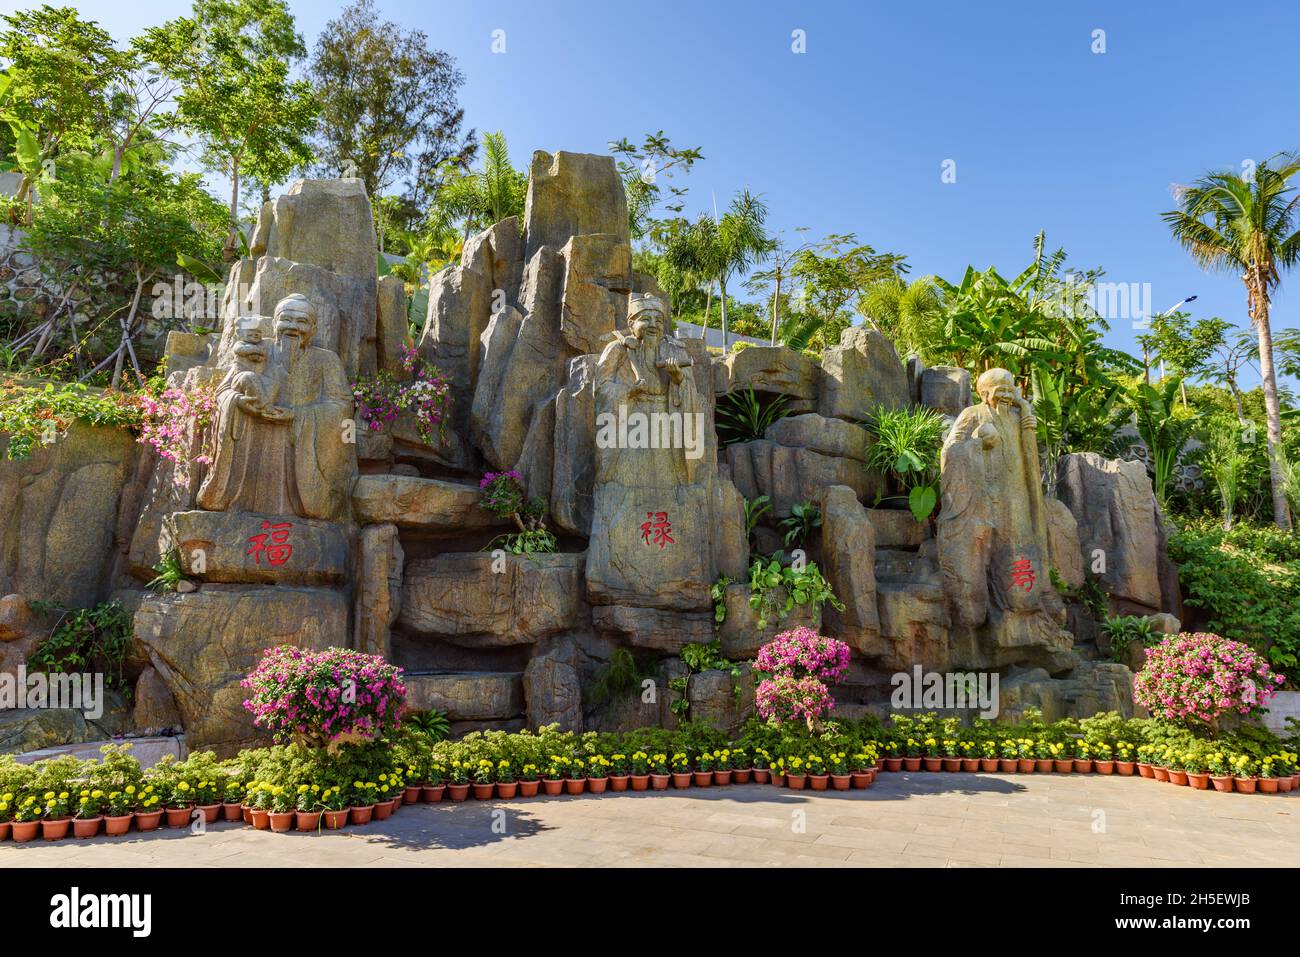 Hainan, China - 18 December 2017: Rock formations depicting prosperity, health and wealth. Stock Photo